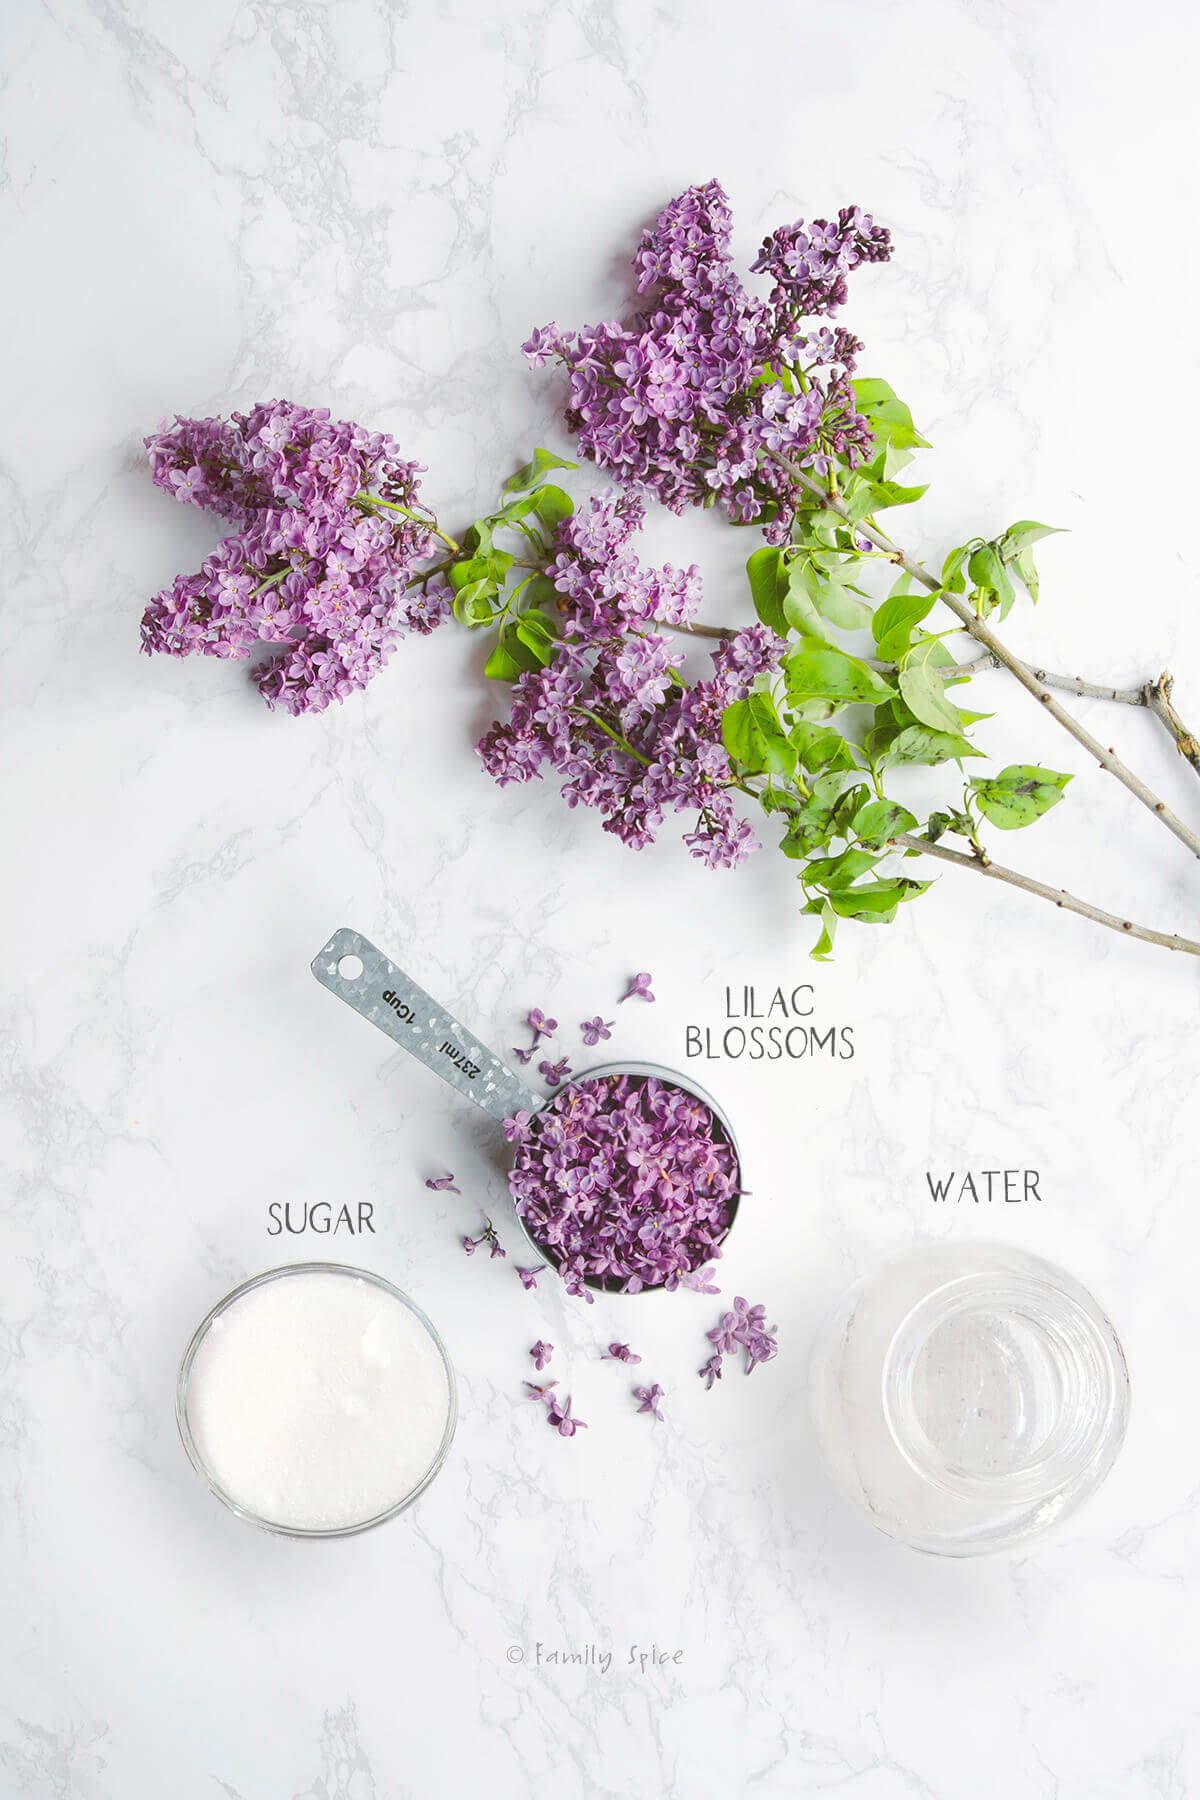 Ingredients labeled and needed to make lilac syrup